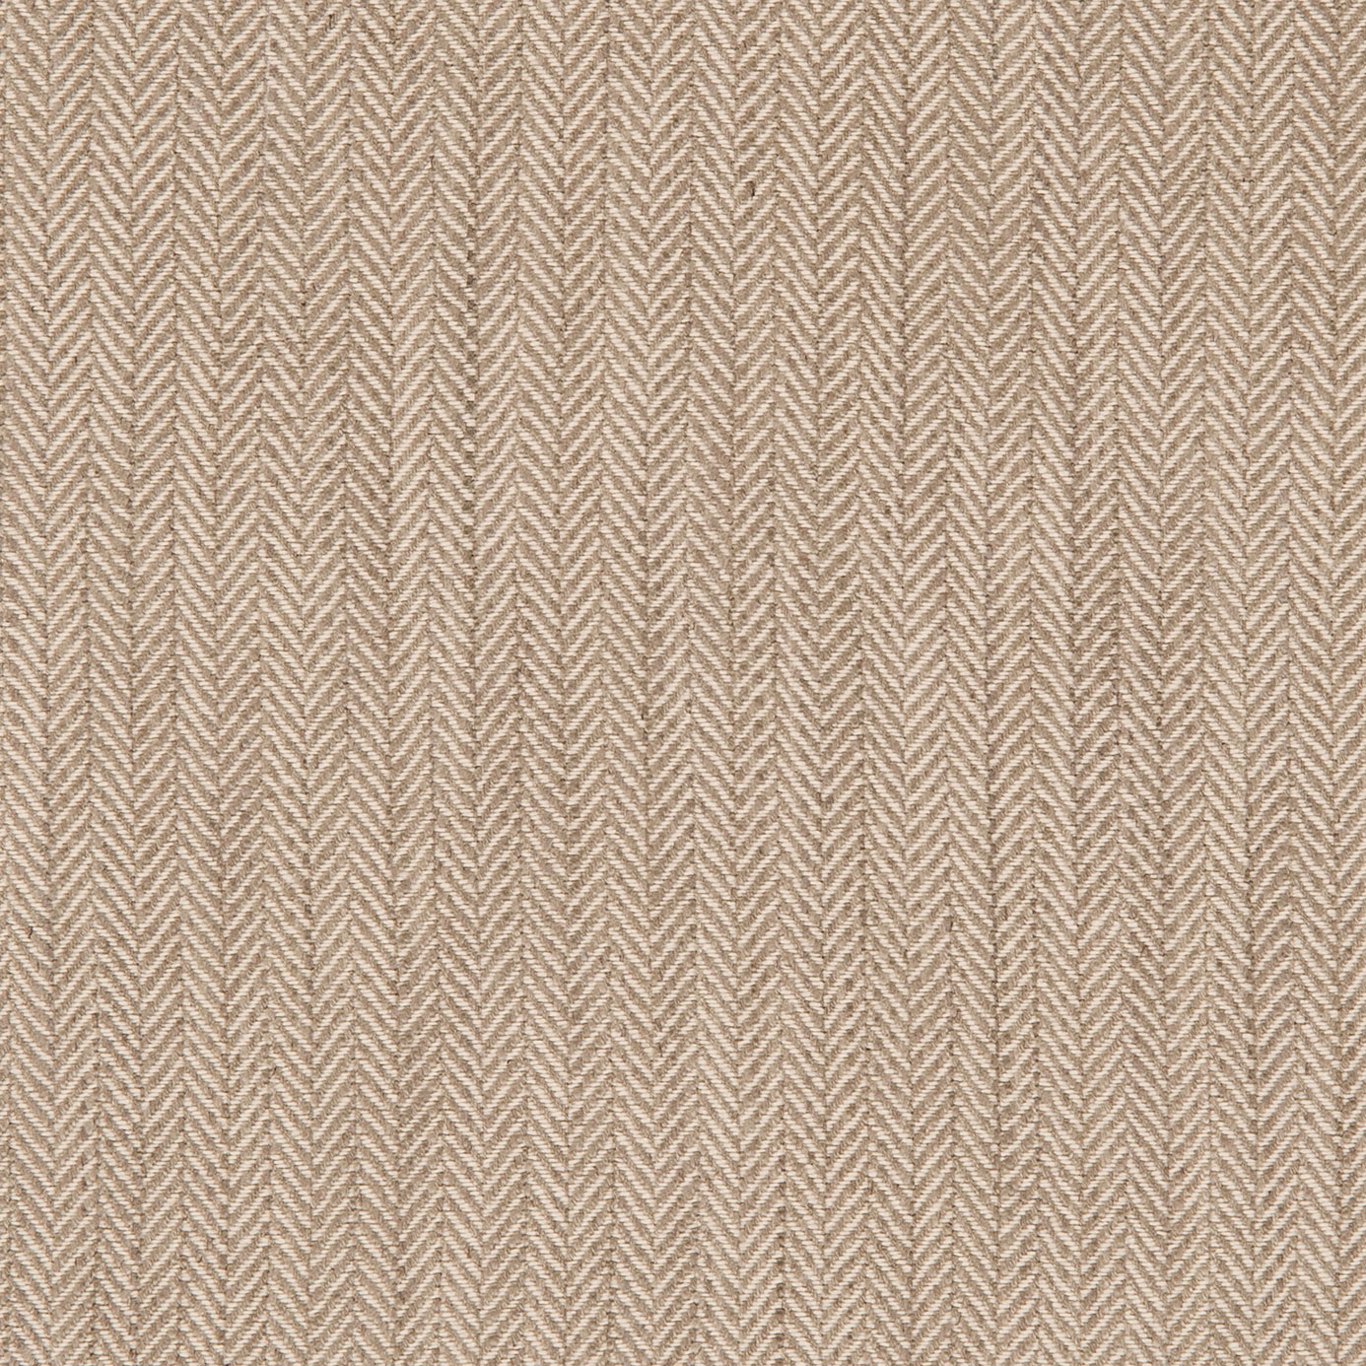 Argyle Taupe Fabric by CNC